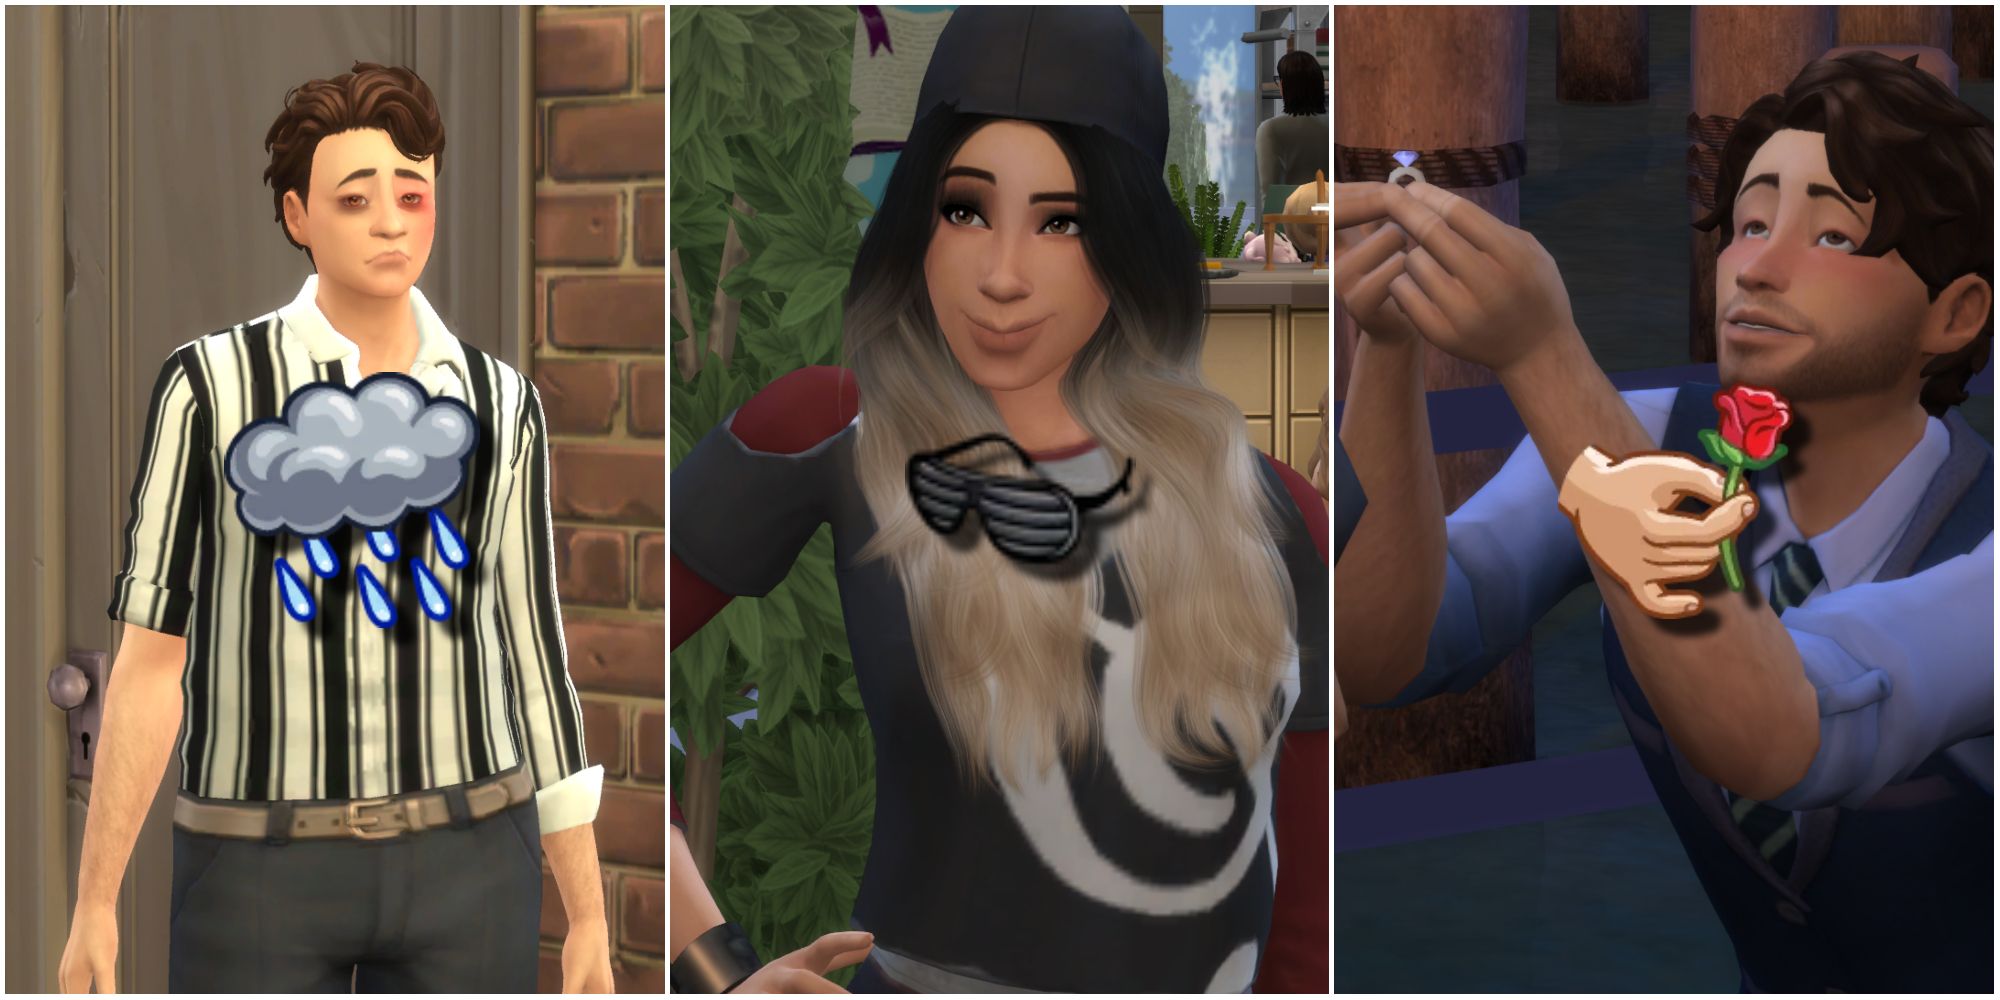 Three Sims representing the sad, confident, and flirty emotions